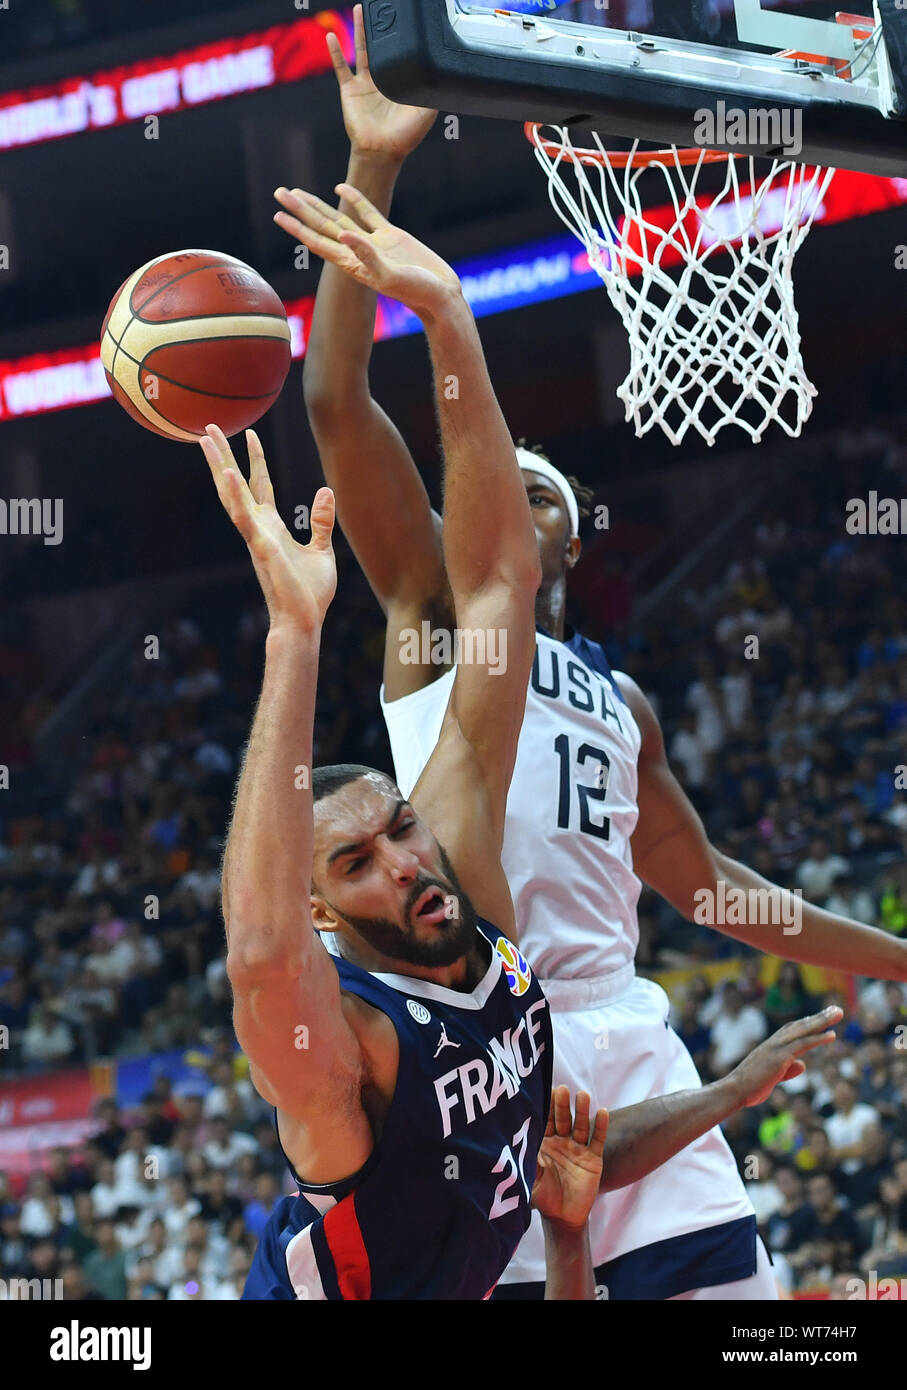 Dongguan, China's Guangdong Province. 11th Sep, 2019. Myles Turne (R) of the United States vies with Rudy Gobert of France during the quarter-final match between the United States and France at the 2019 FIBA World Cup in Dongguan, south China's Guangdong Province, Sept. 11, 2019. Credit: Zhu Zheng/Xinhua/Alamy Live News Stock Photo